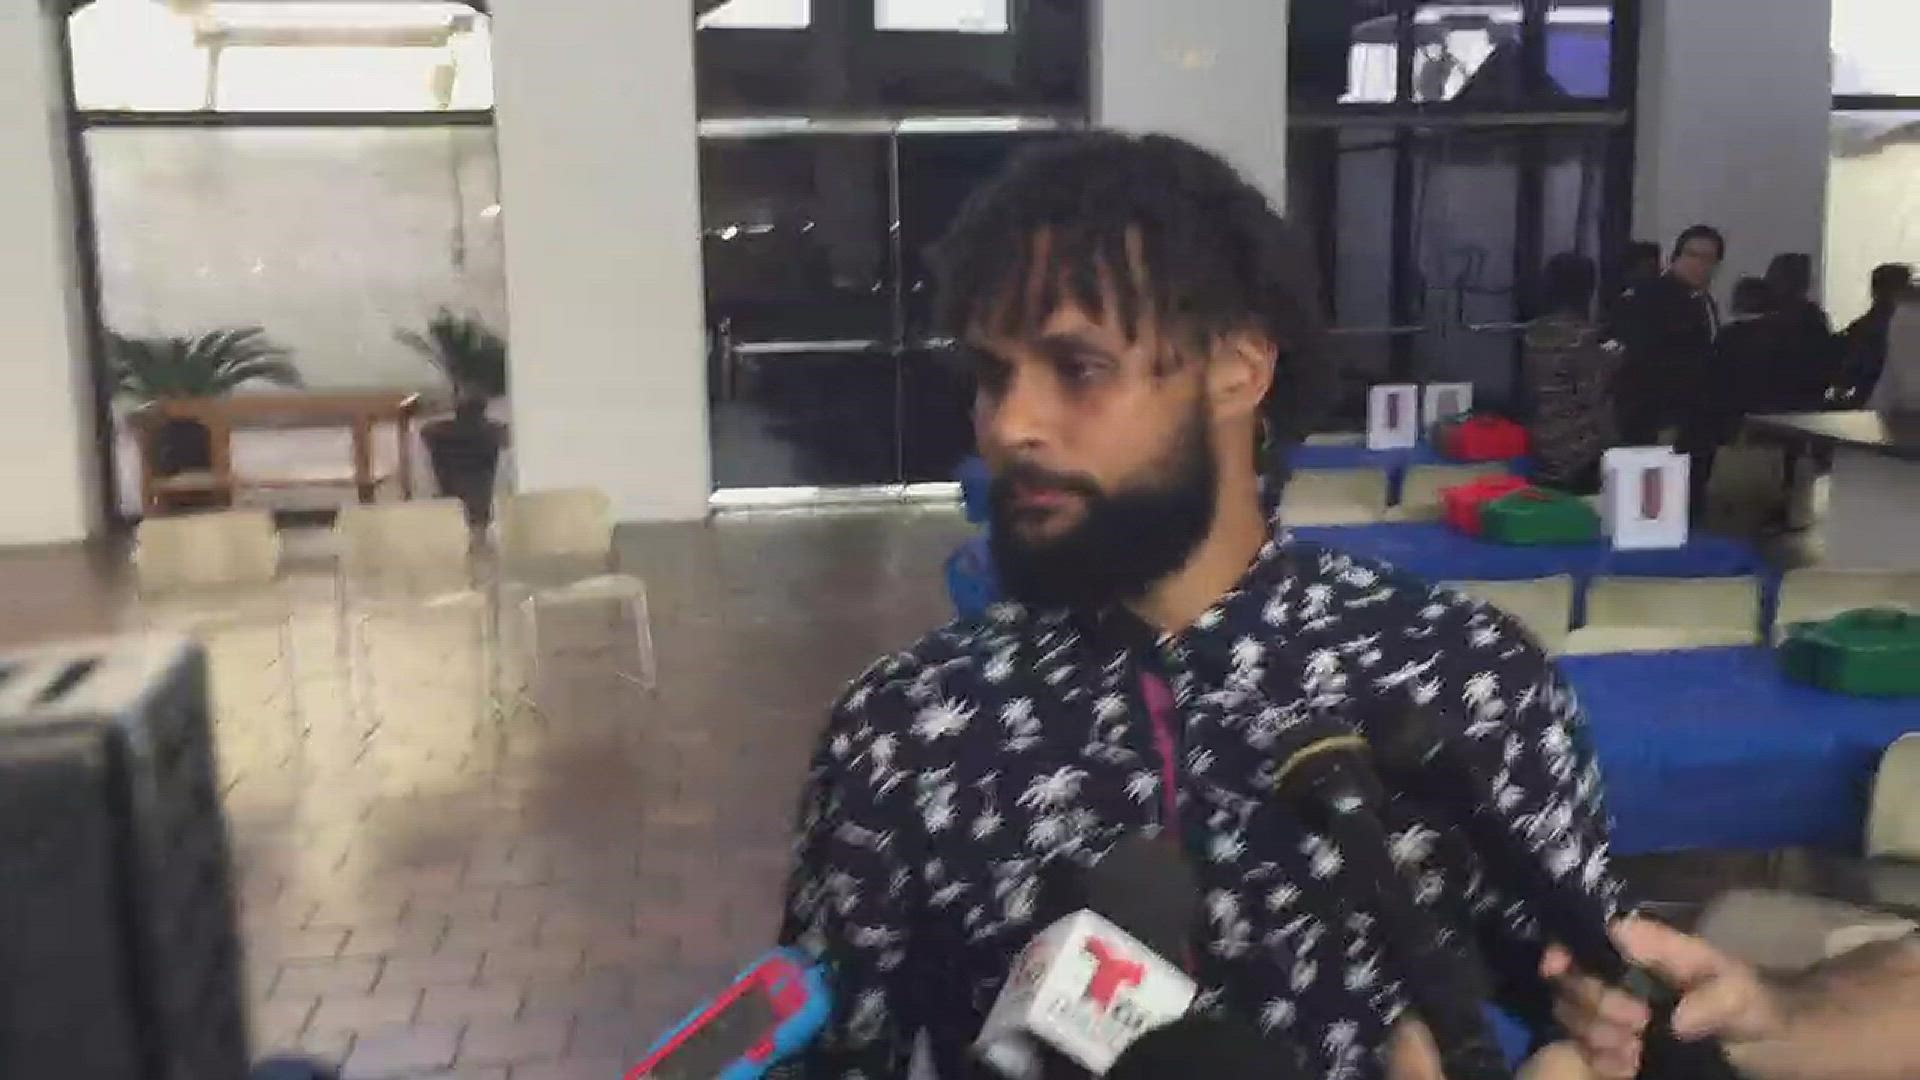 Patty Mills on racial taunting during Sunday's game in Cleveland